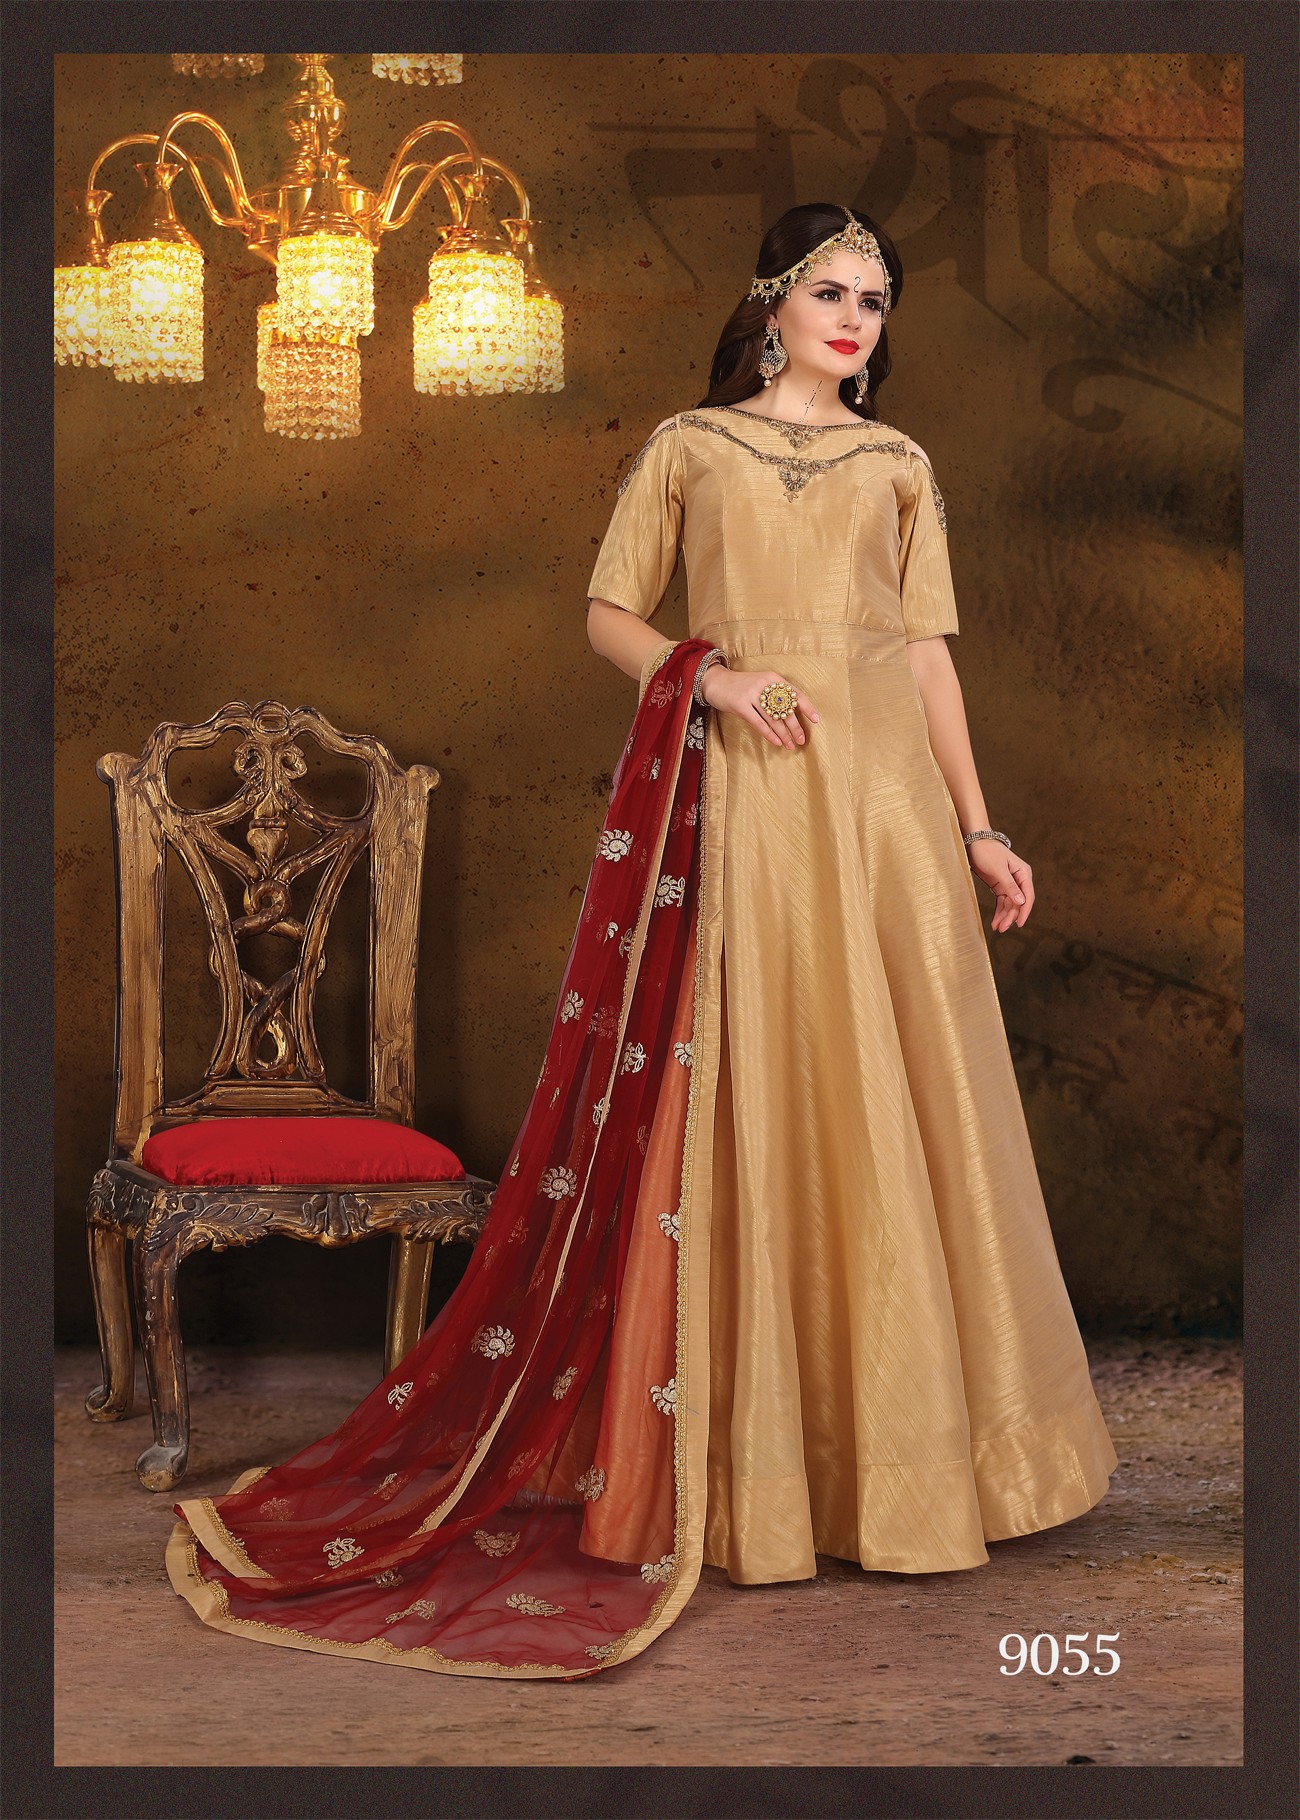 Buy Navin Fashion Women's Georgette Semi-Stitched Gown With Dupatta (Gold)  at Amazon.in